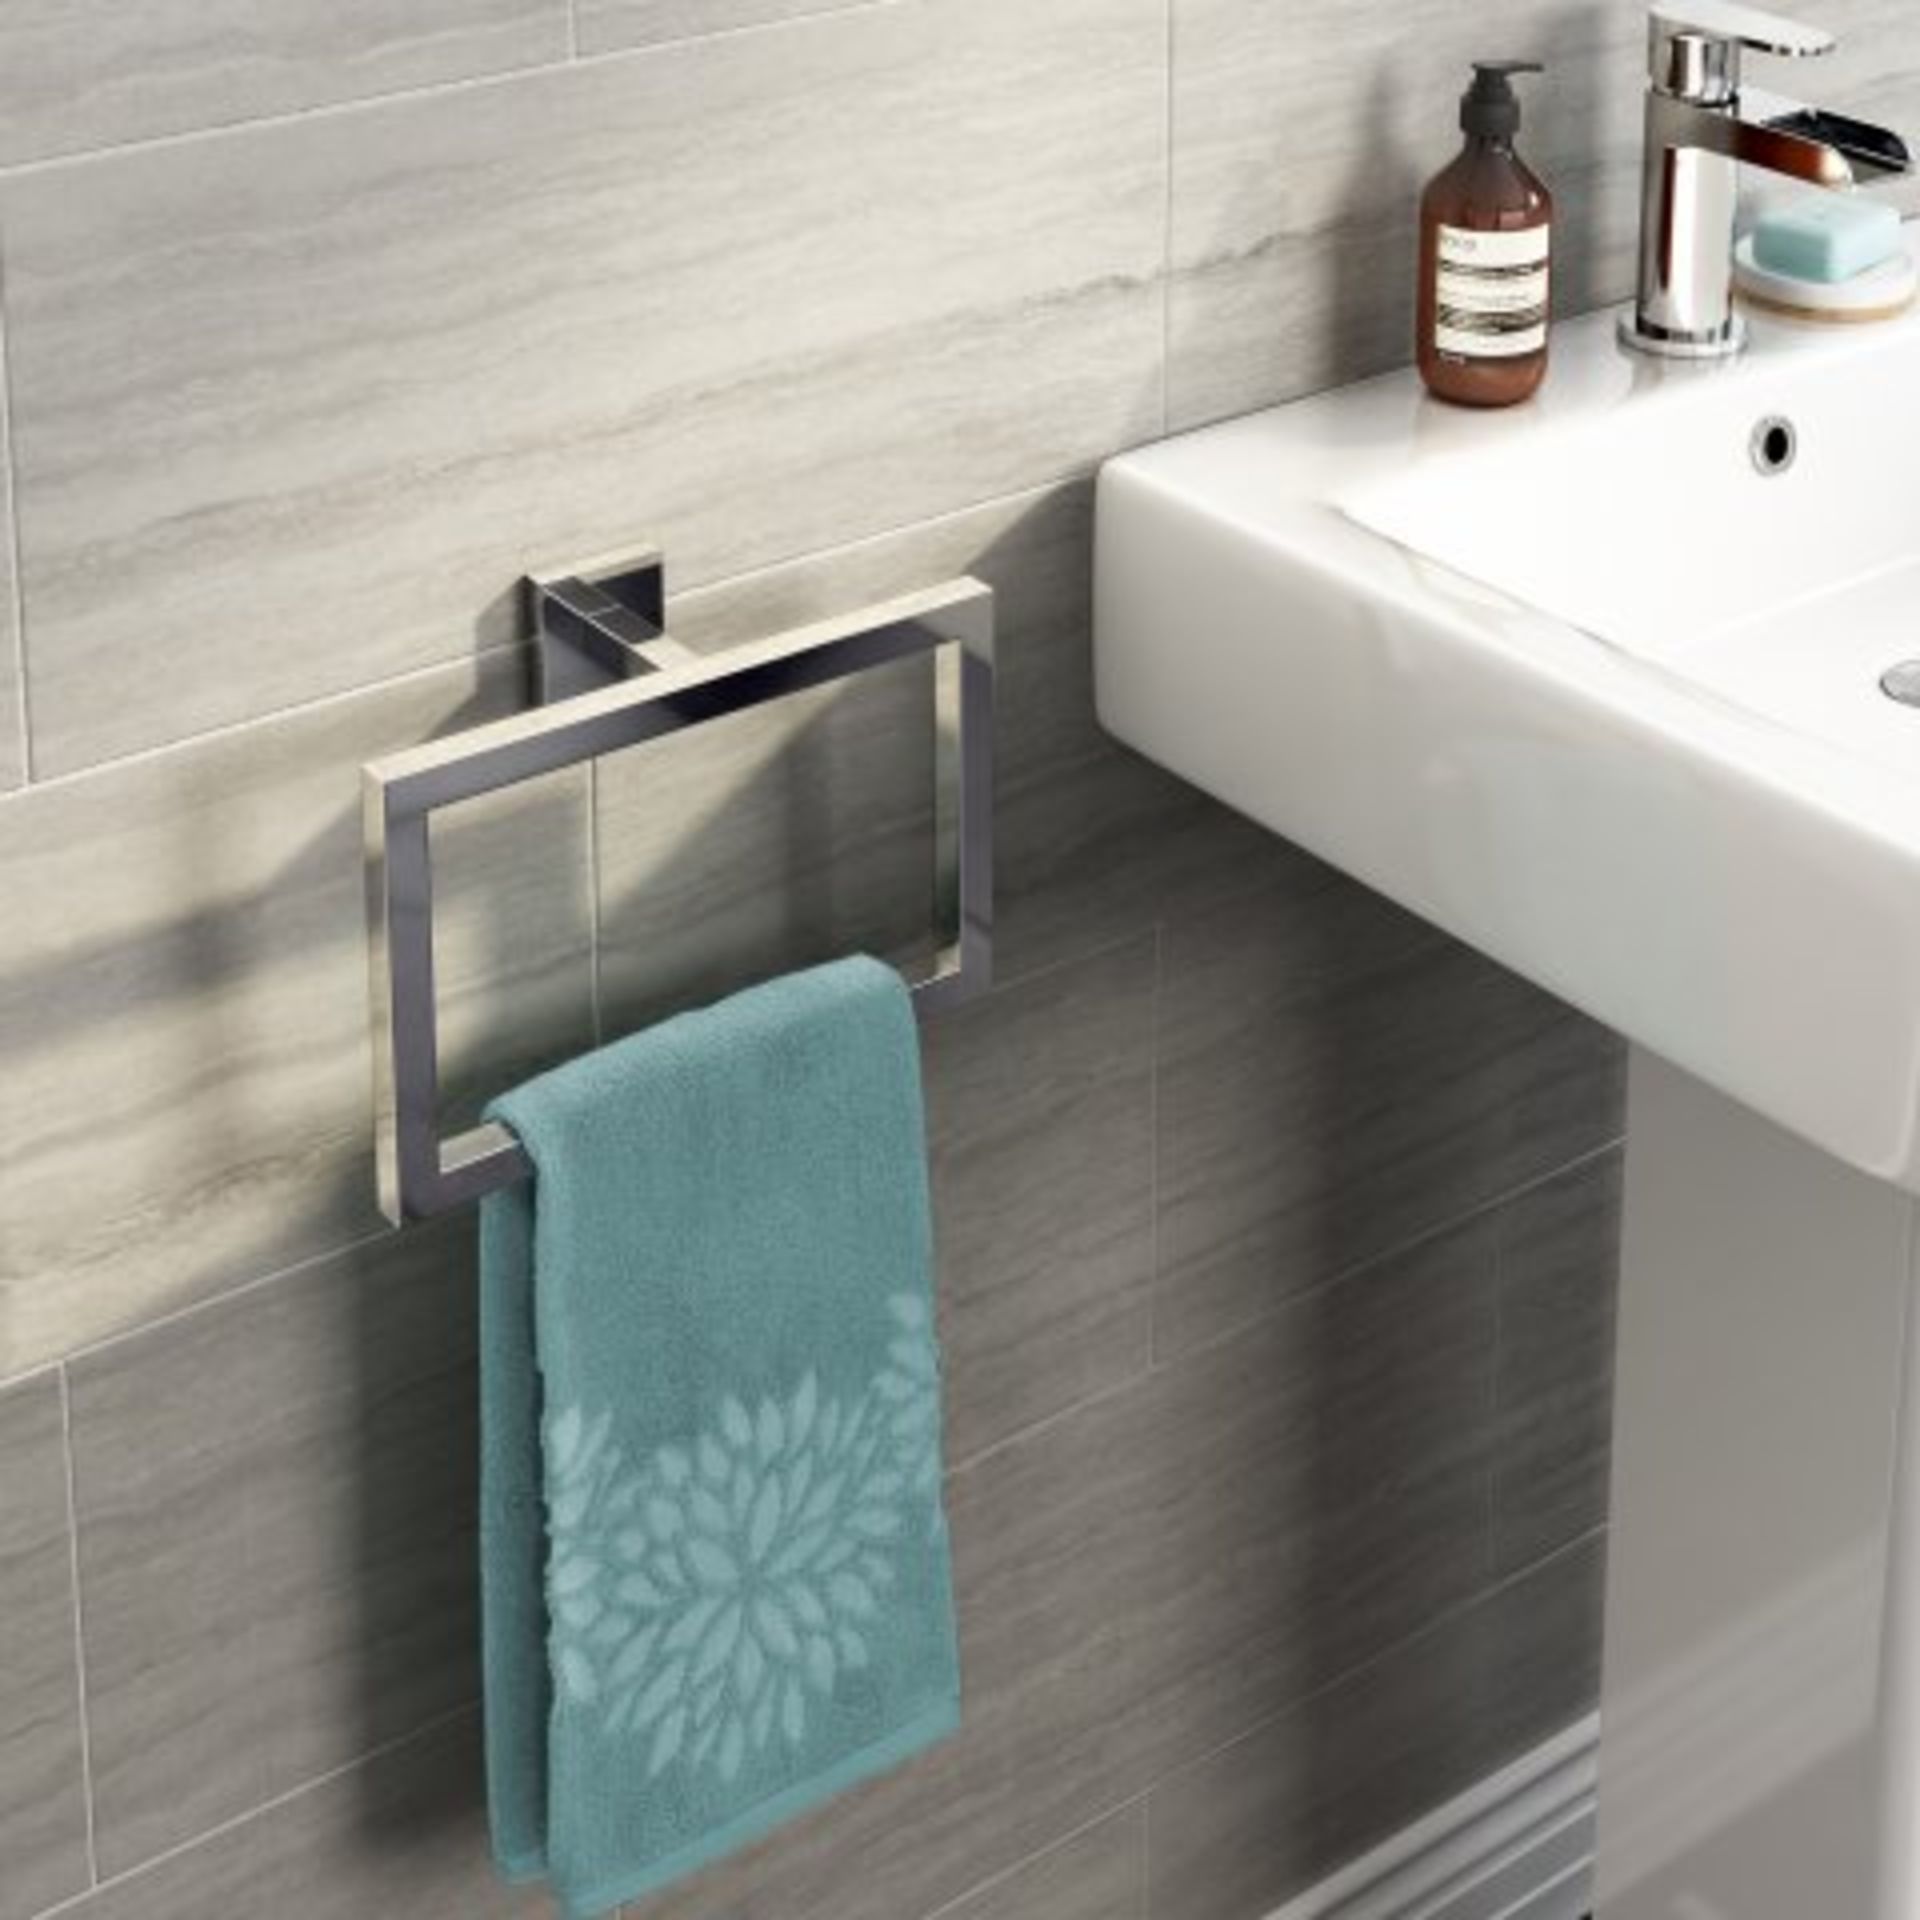 (I57) Jesmond Towel Ring Paying attention to detail can massively uplift your bathroom d?cor. Our - Image 2 of 3